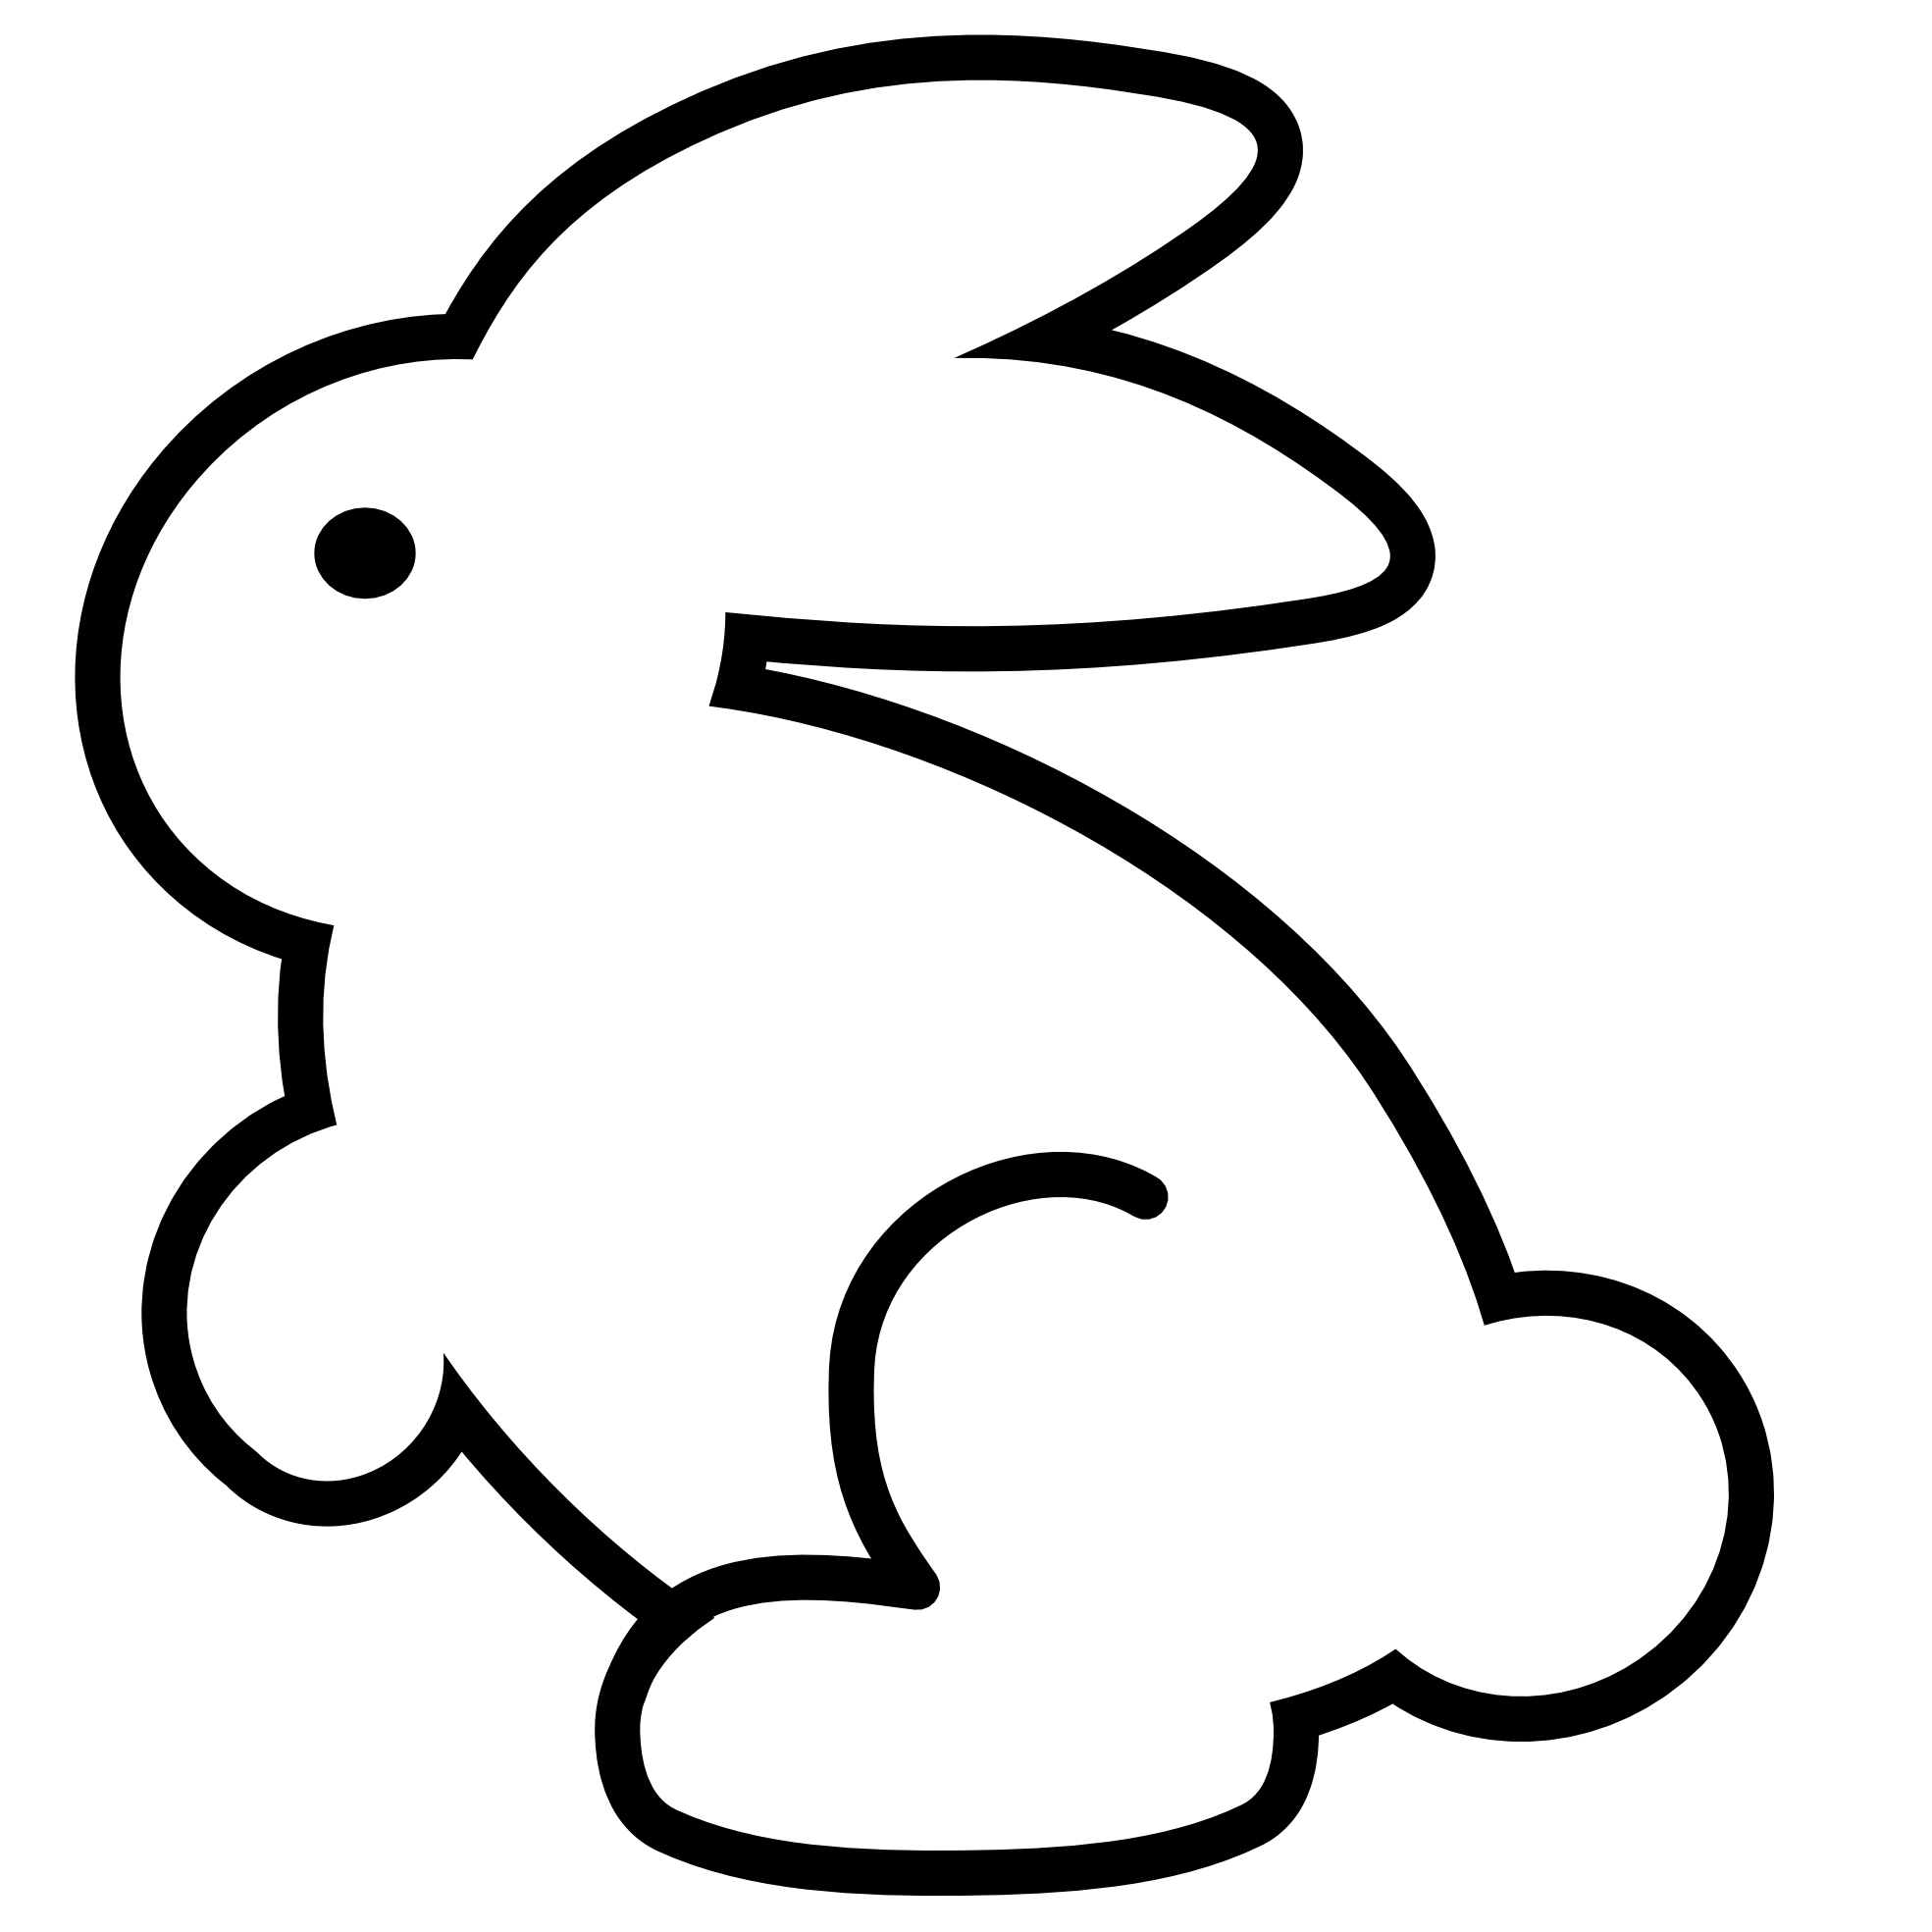 Bunny clipart images clipart